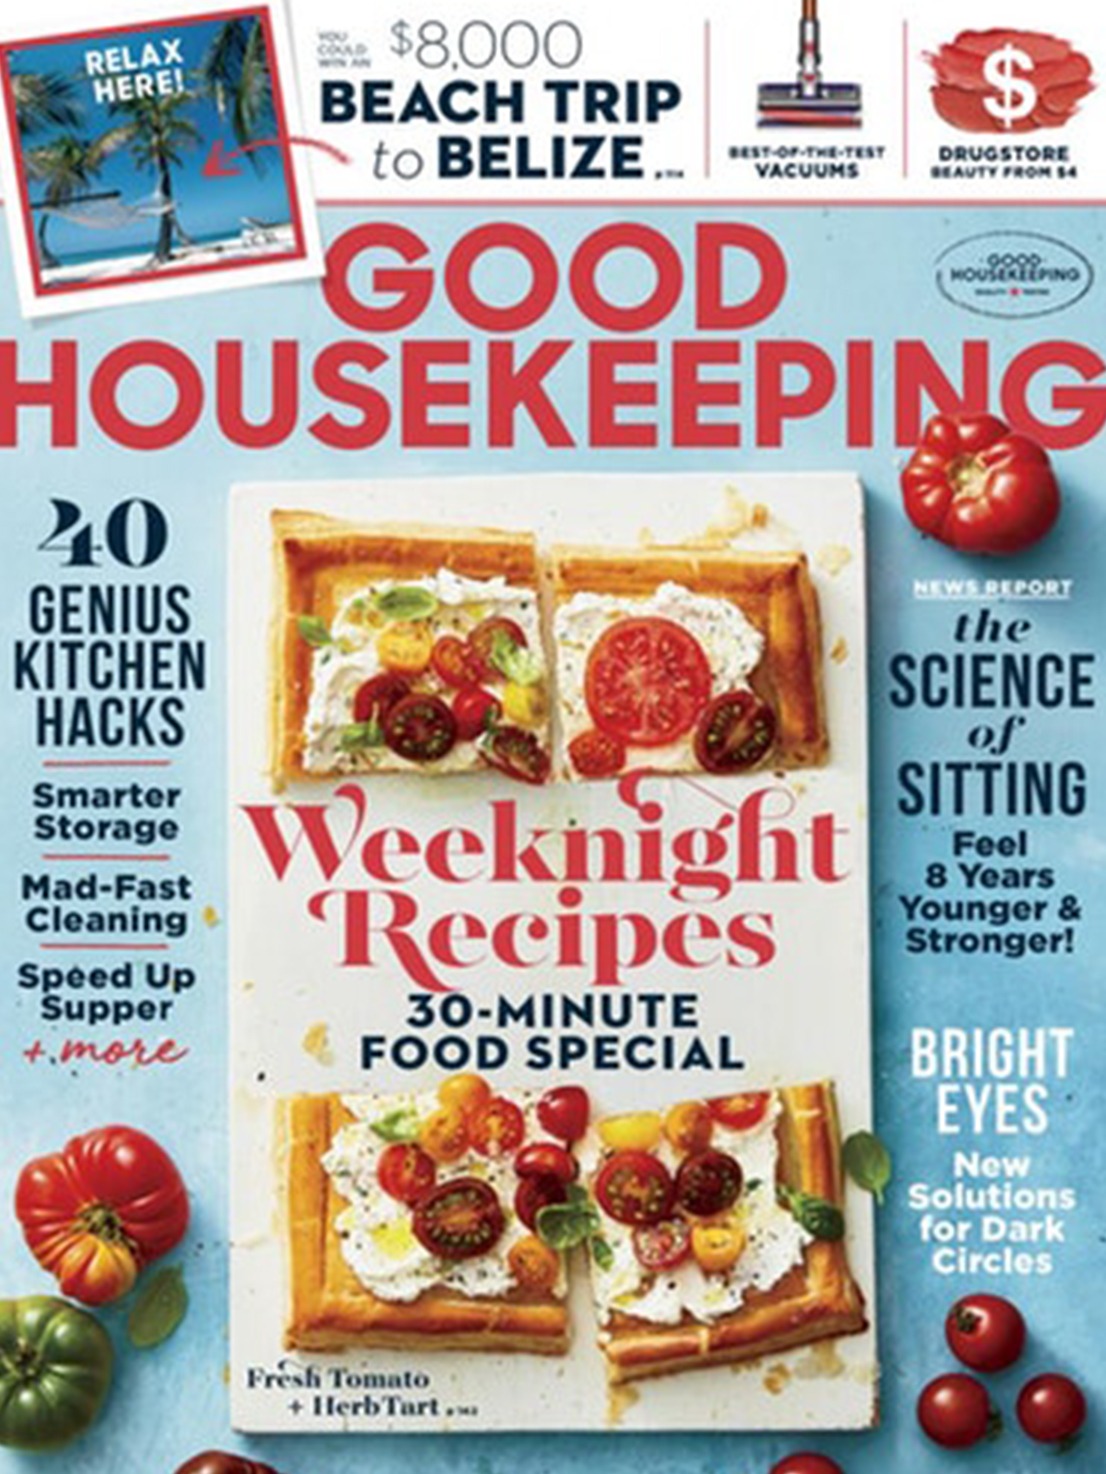 magCovers_0001_https---www.discountmags.com-shopimages-products-normal-extra-i-5515-good-housekeeping-Cover-2018-Septemb